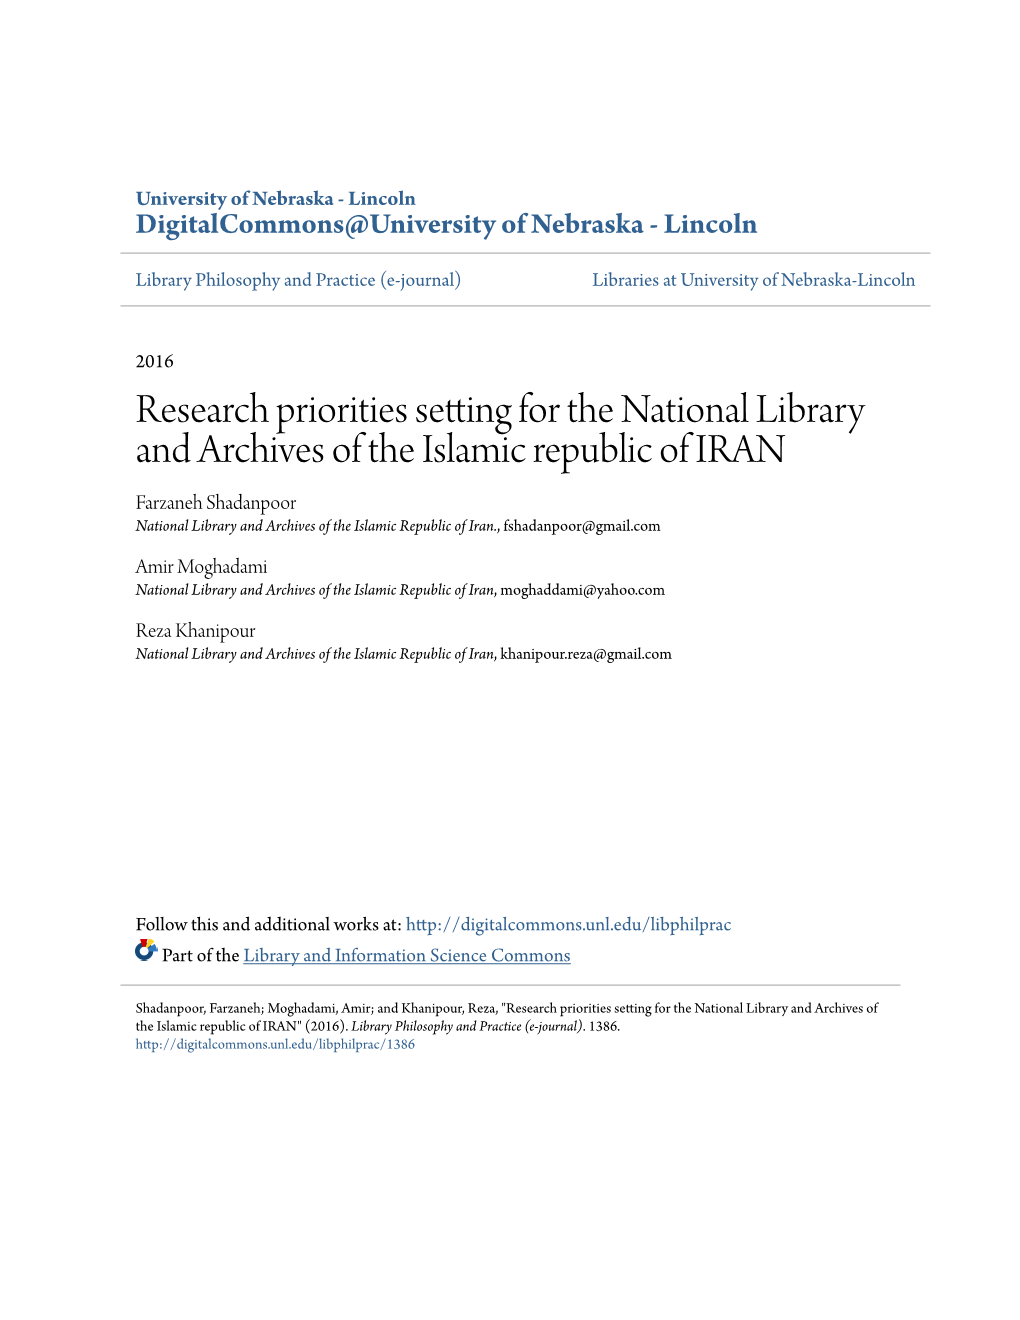 Research Priorities Setting for the National Library and Archives of the Islamic Republic of IRAN